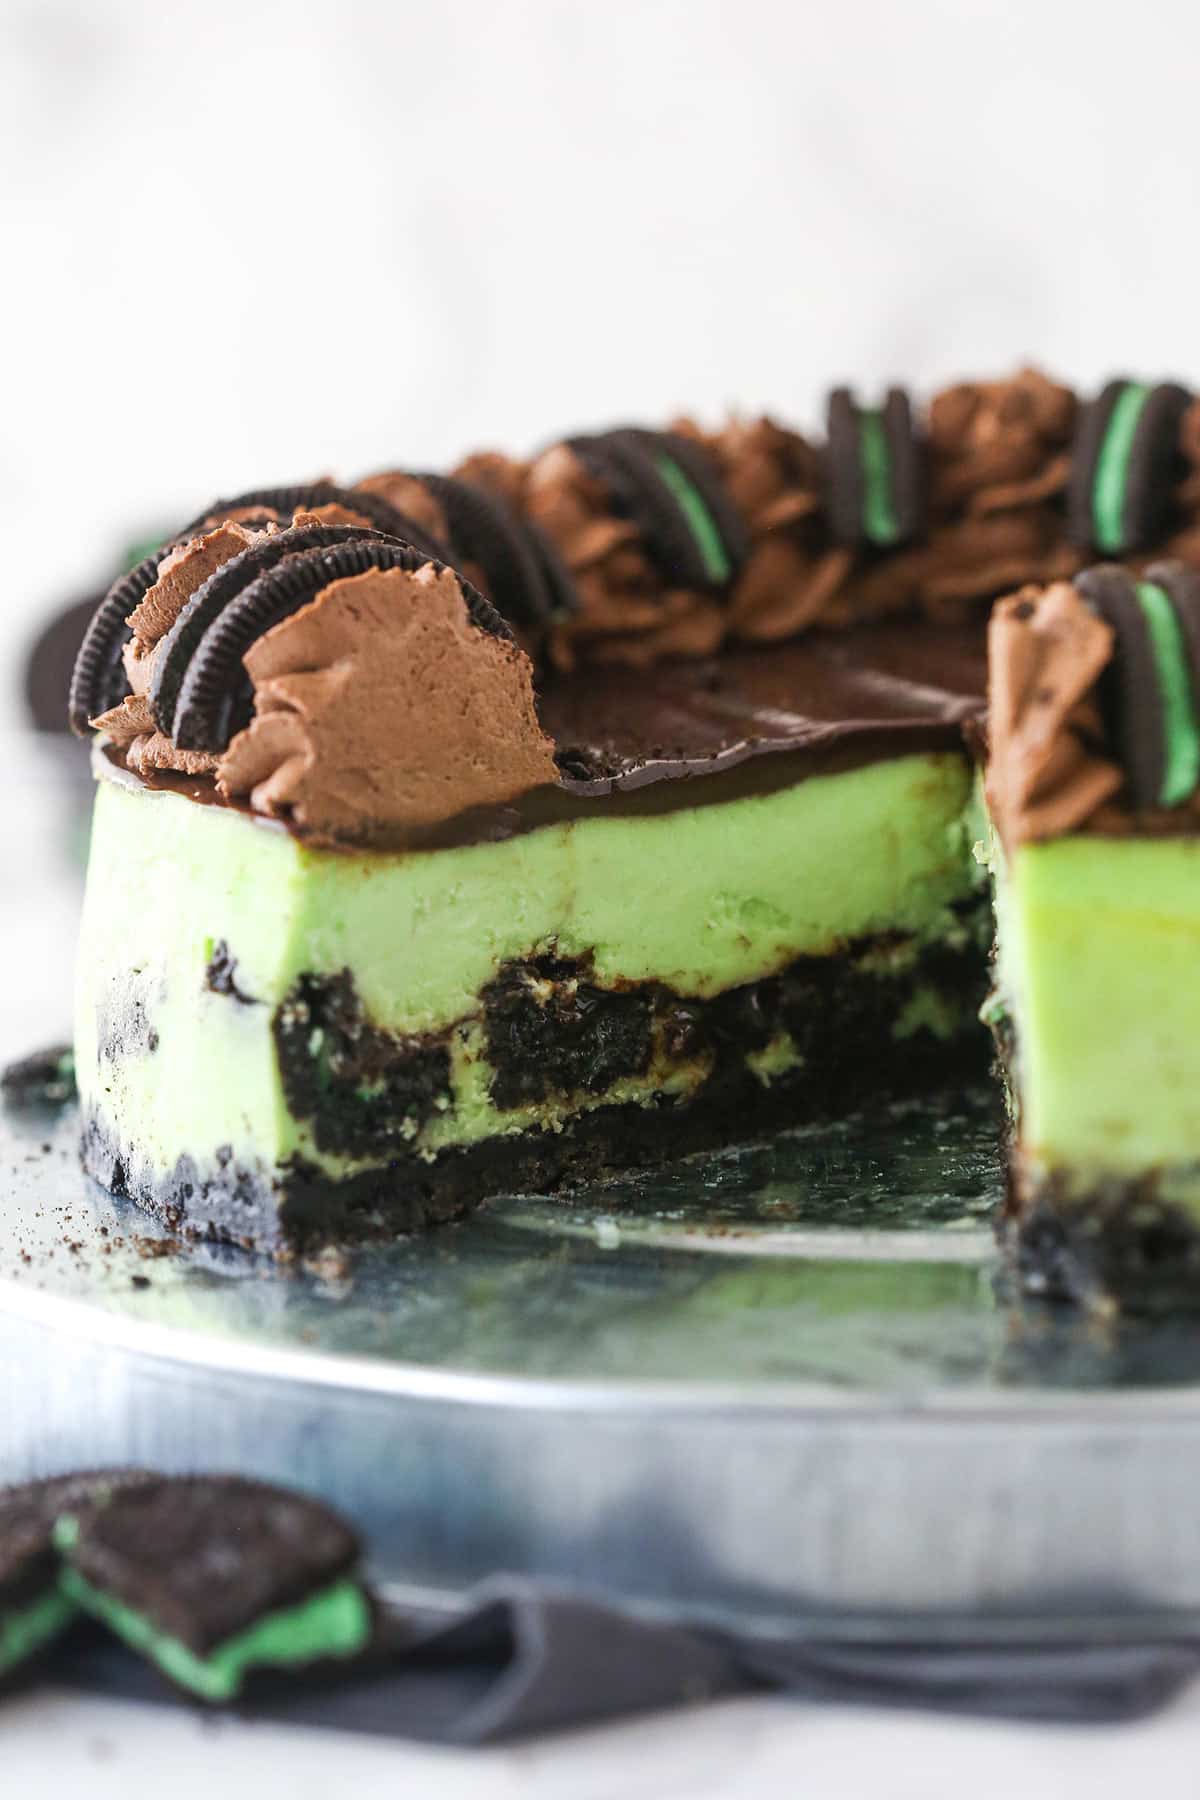 Mint Oreo cheesecake with a slice taken out of it.